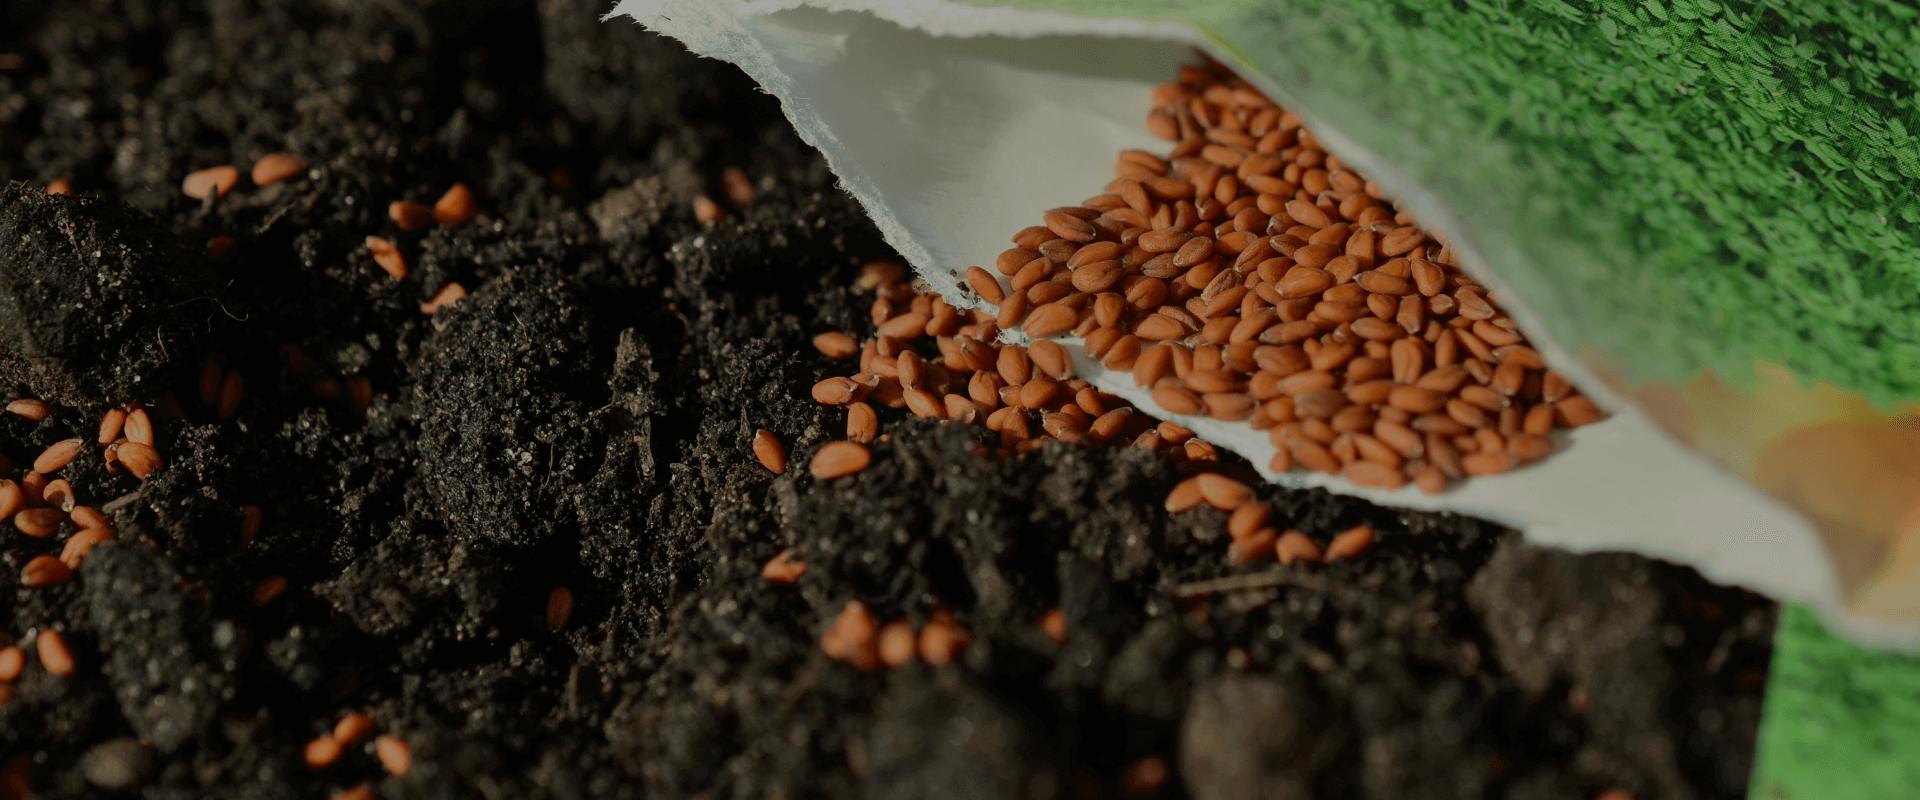 Fertilizers and Seeds